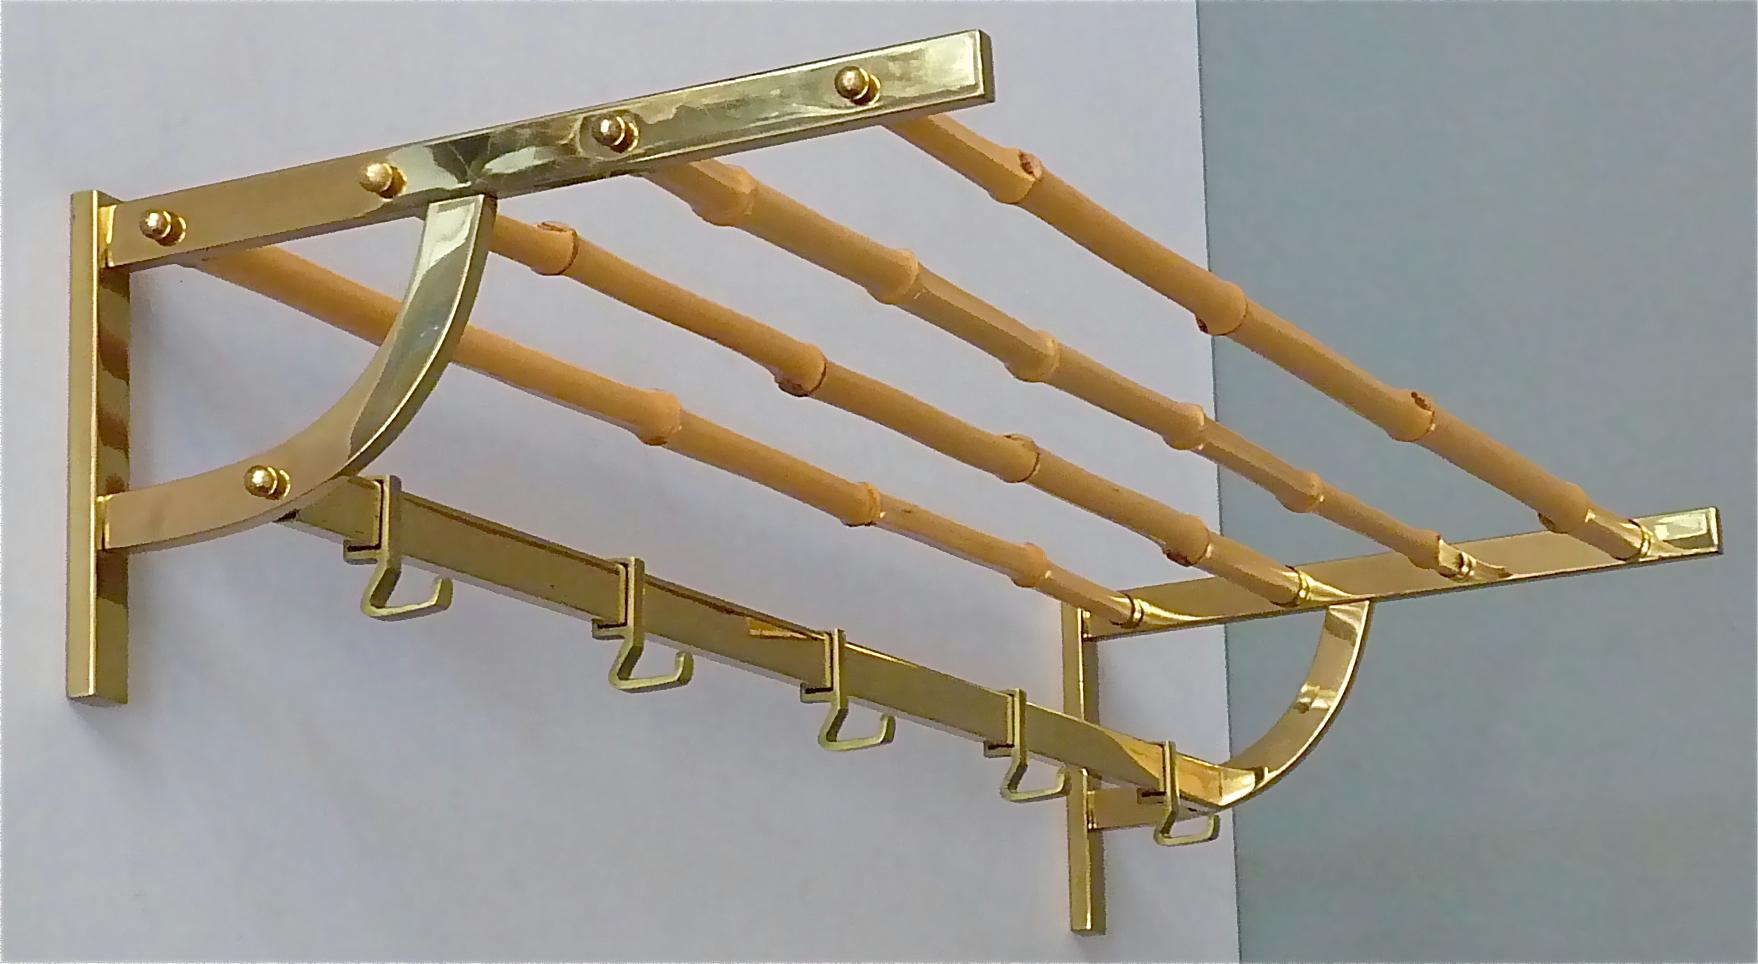 Stunning and exceptional modernist coat rack or wall wardrobe, which has been designed and executed in the 1950s in Austria, probably it belongs to one of the wonderful designs by Hagenauer, Josef Frank for Haus & Garten or Kalmar. It is made of